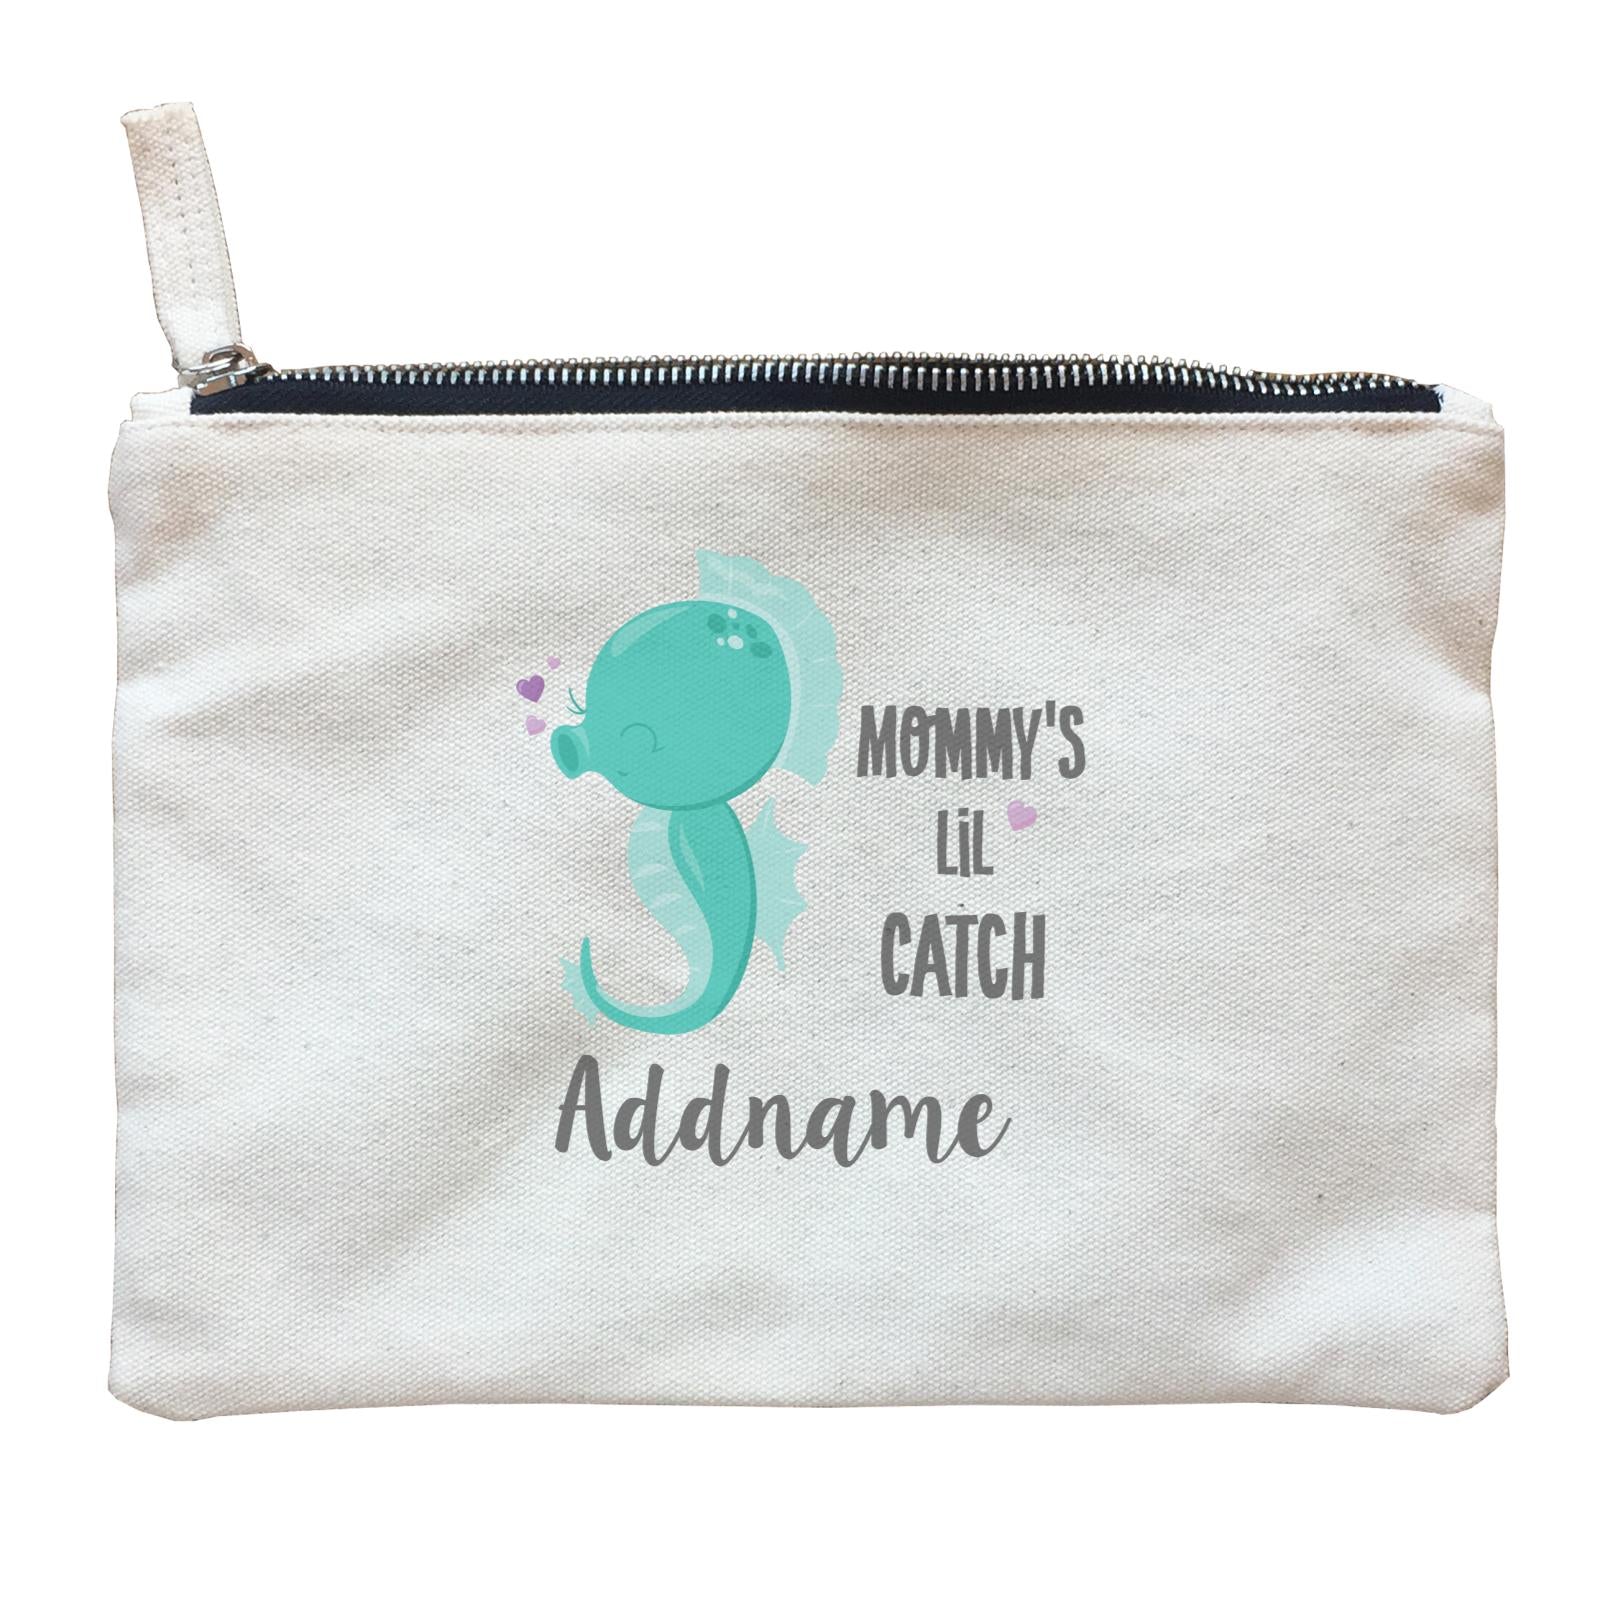 Cute Sea Animals Green Seahorse Mommy's Lil Catch Addname Zipper Pouch